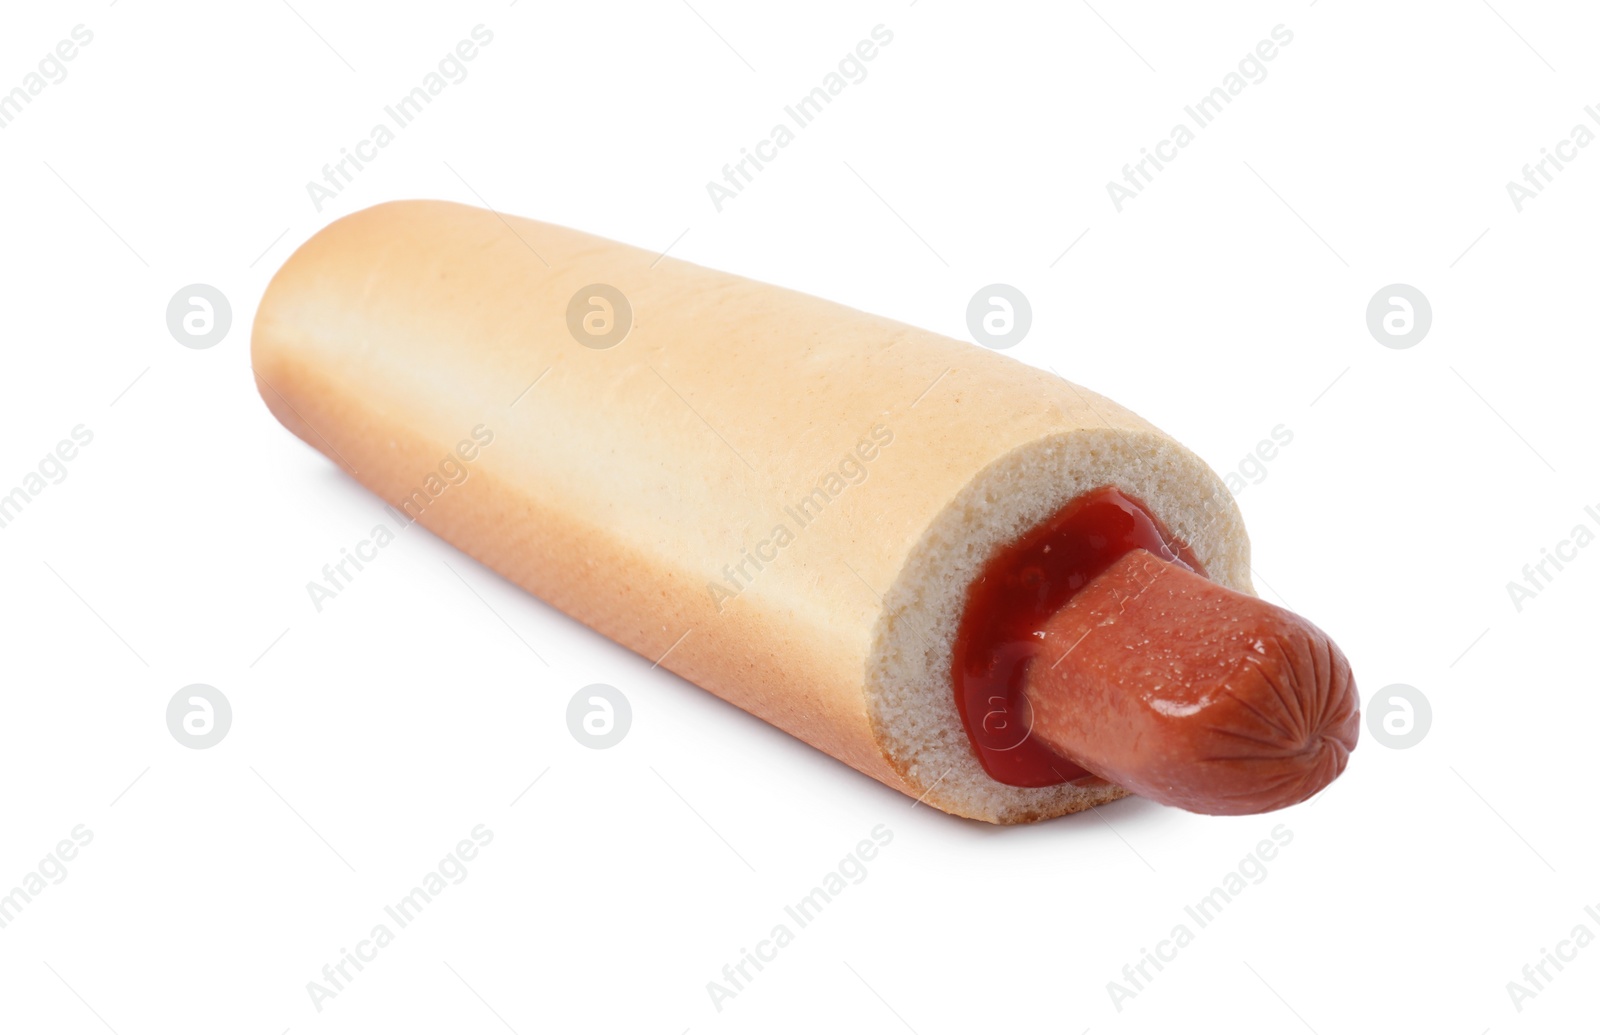 Photo of Tasty french hot dog with ketchup isolated on white